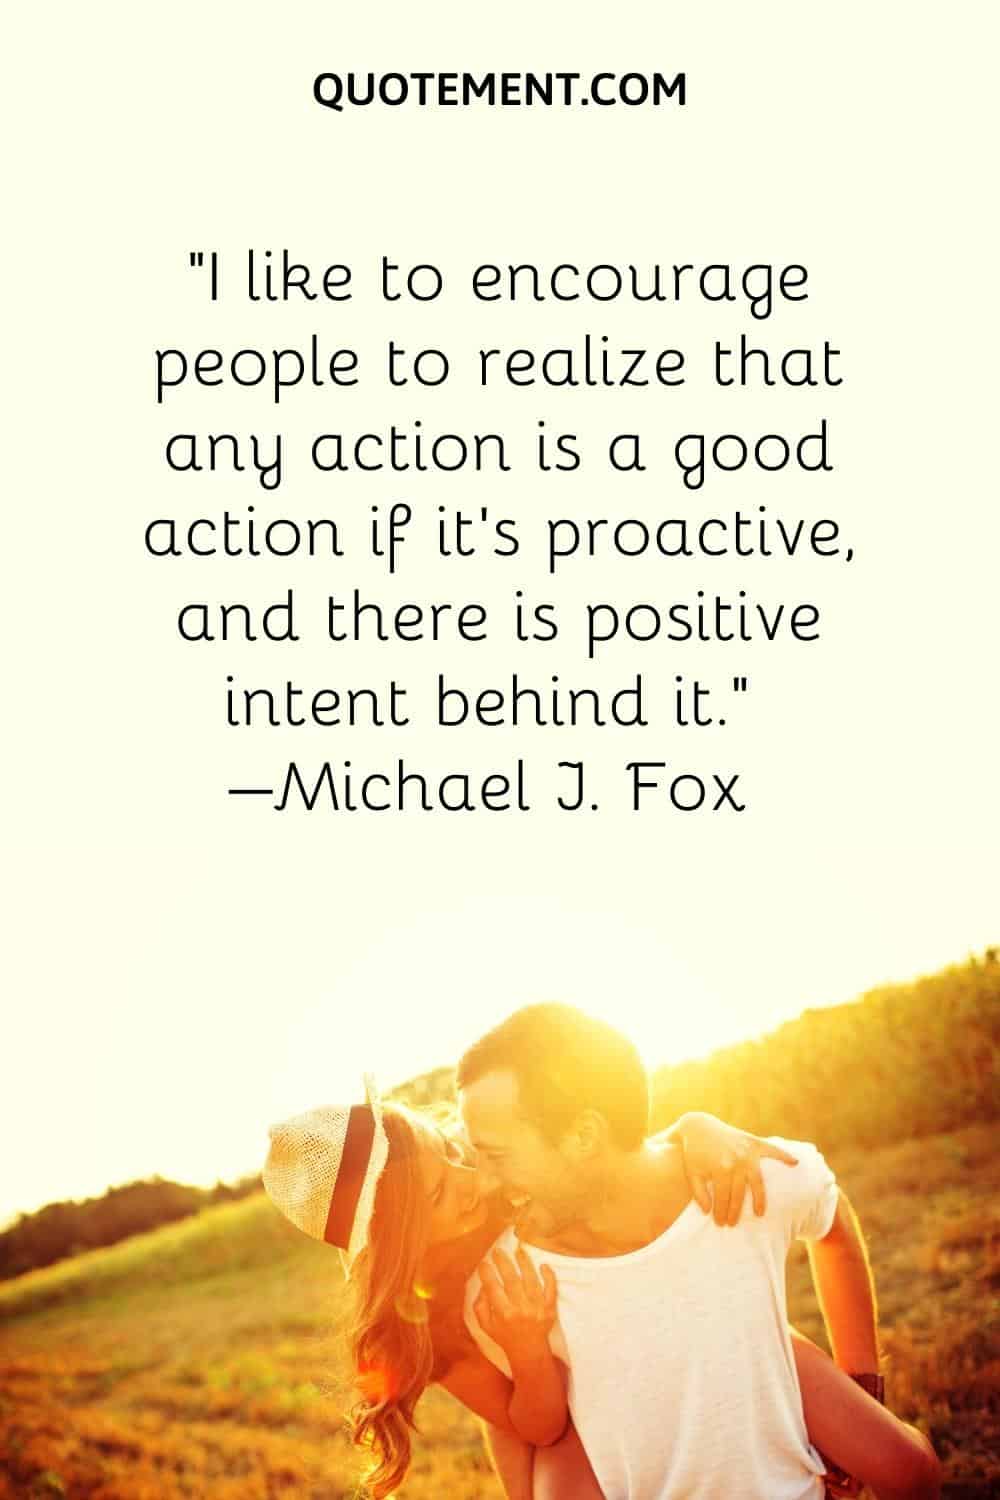 I like to encourage people to realize that any action is a good action if it's proactive